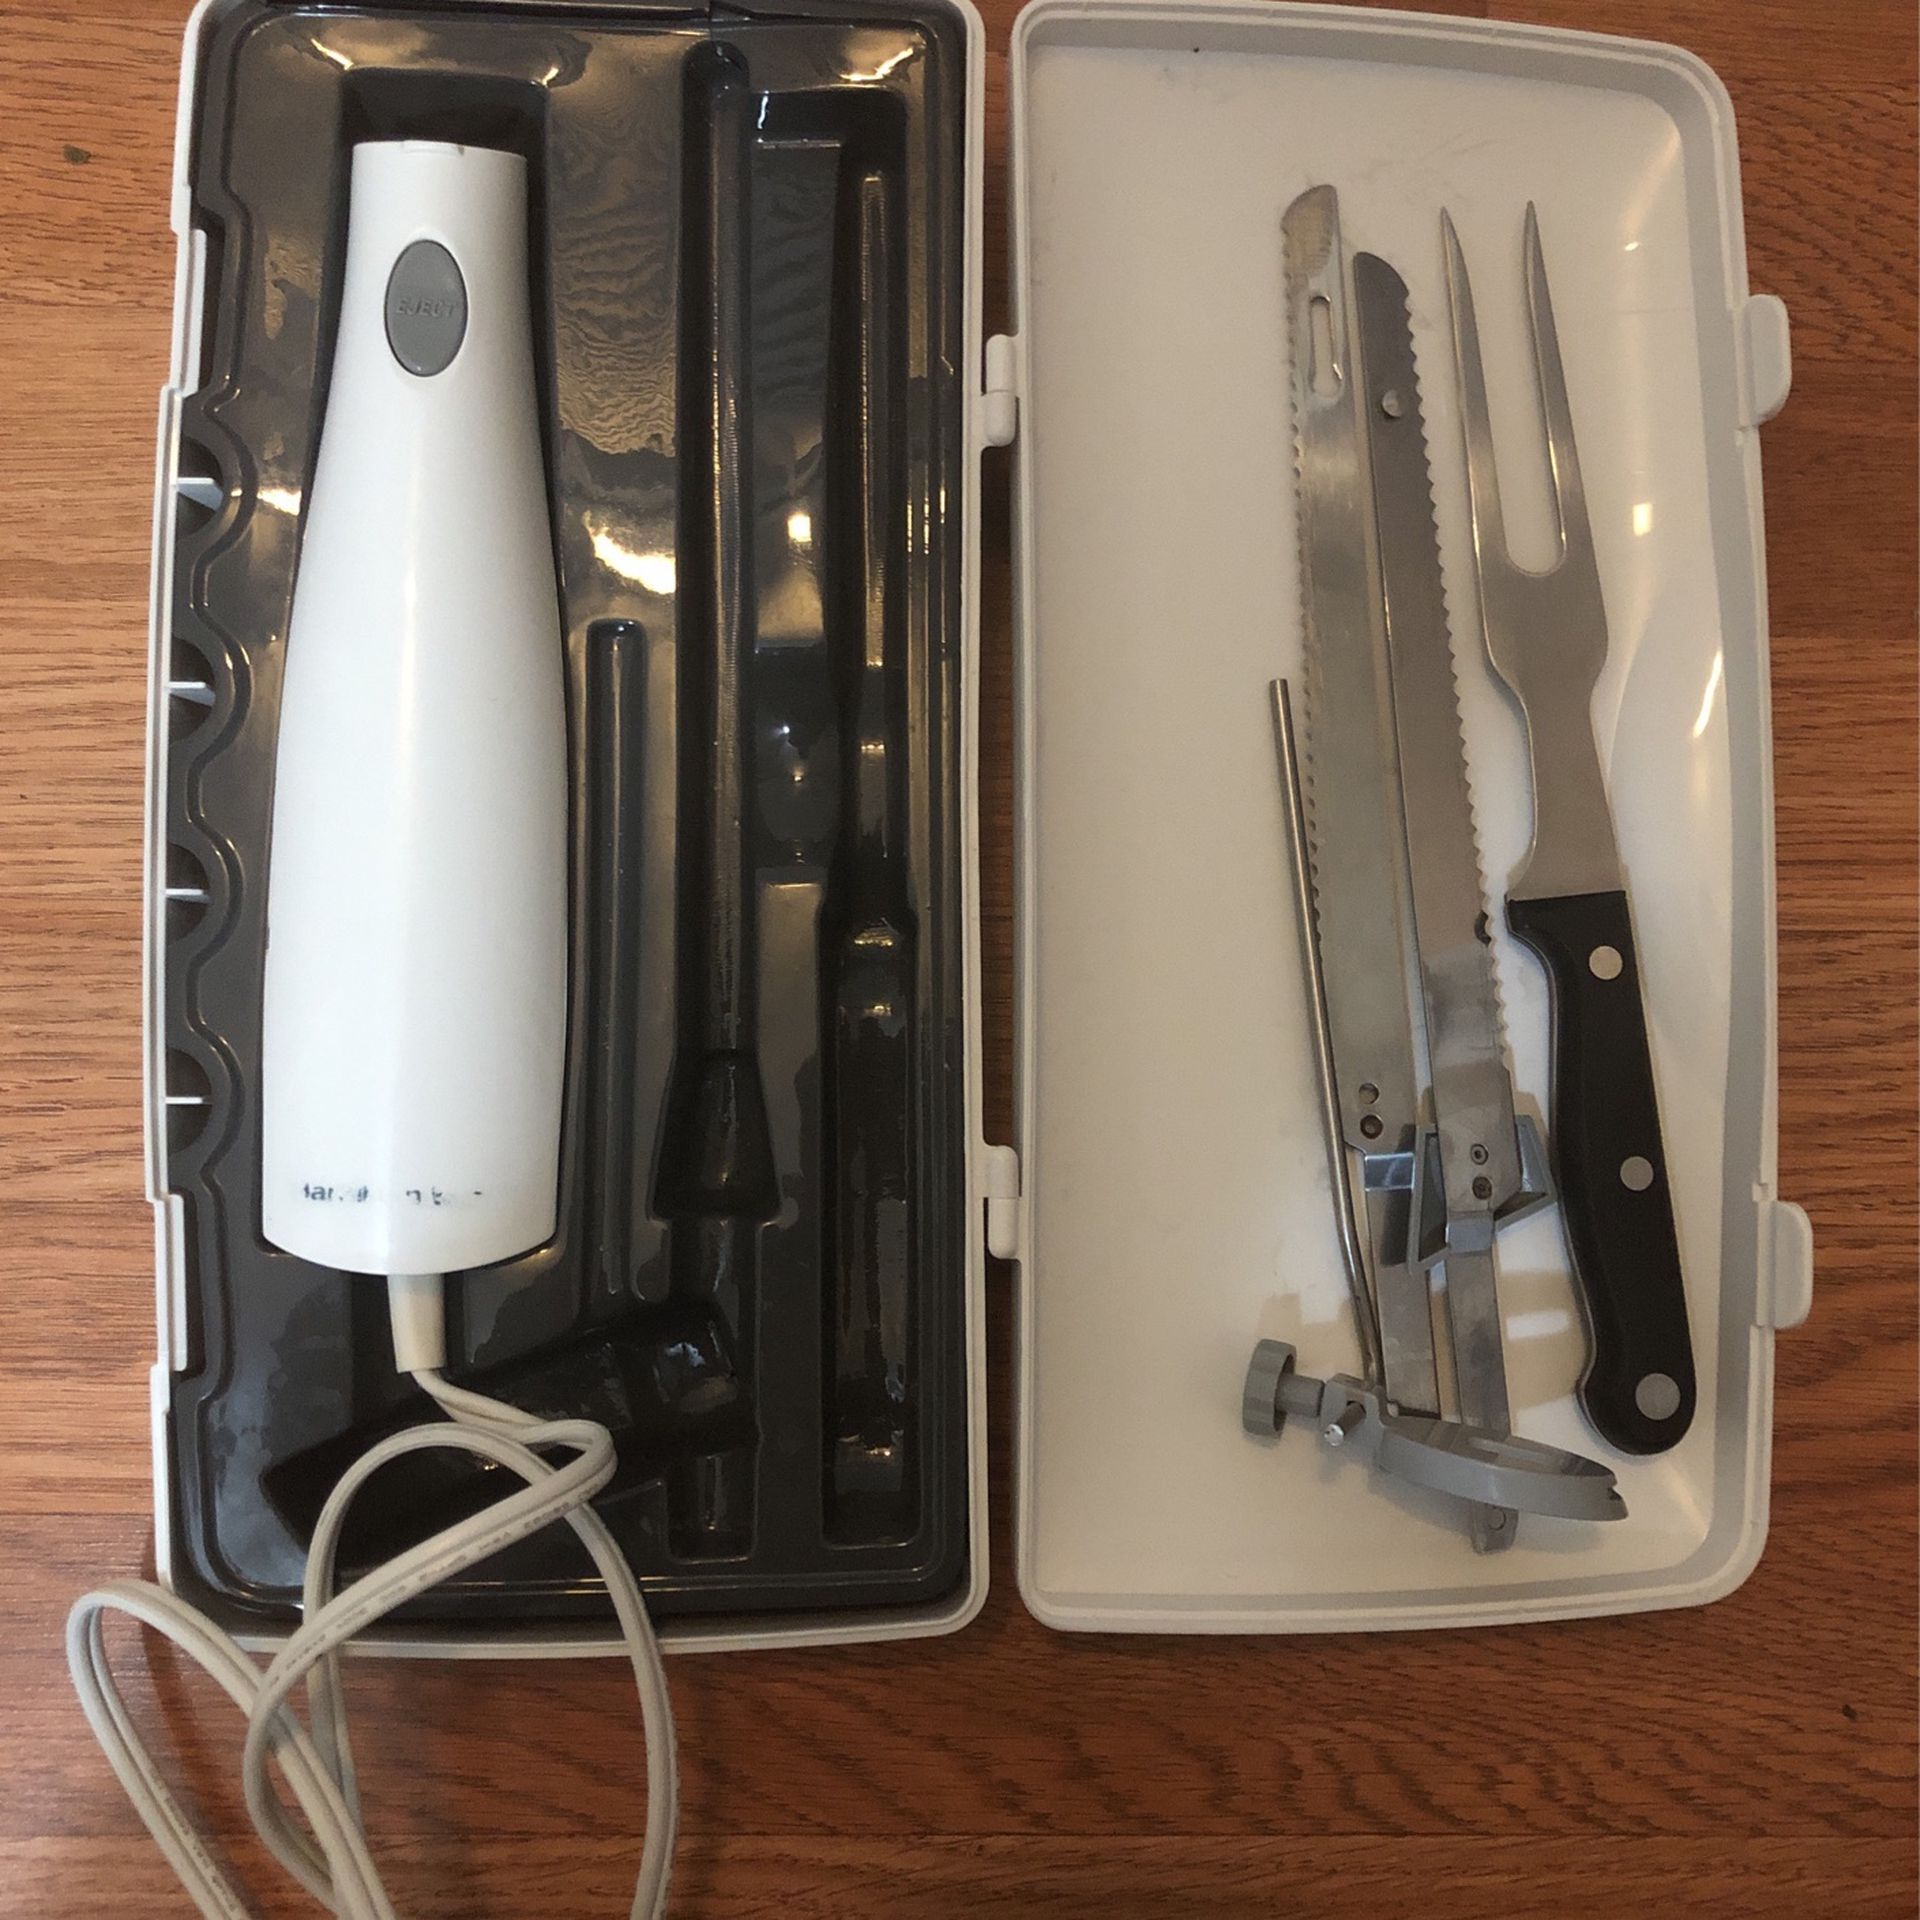 Cuisinart Electric Knife Set for Sale in West Palm Beach, FL - OfferUp